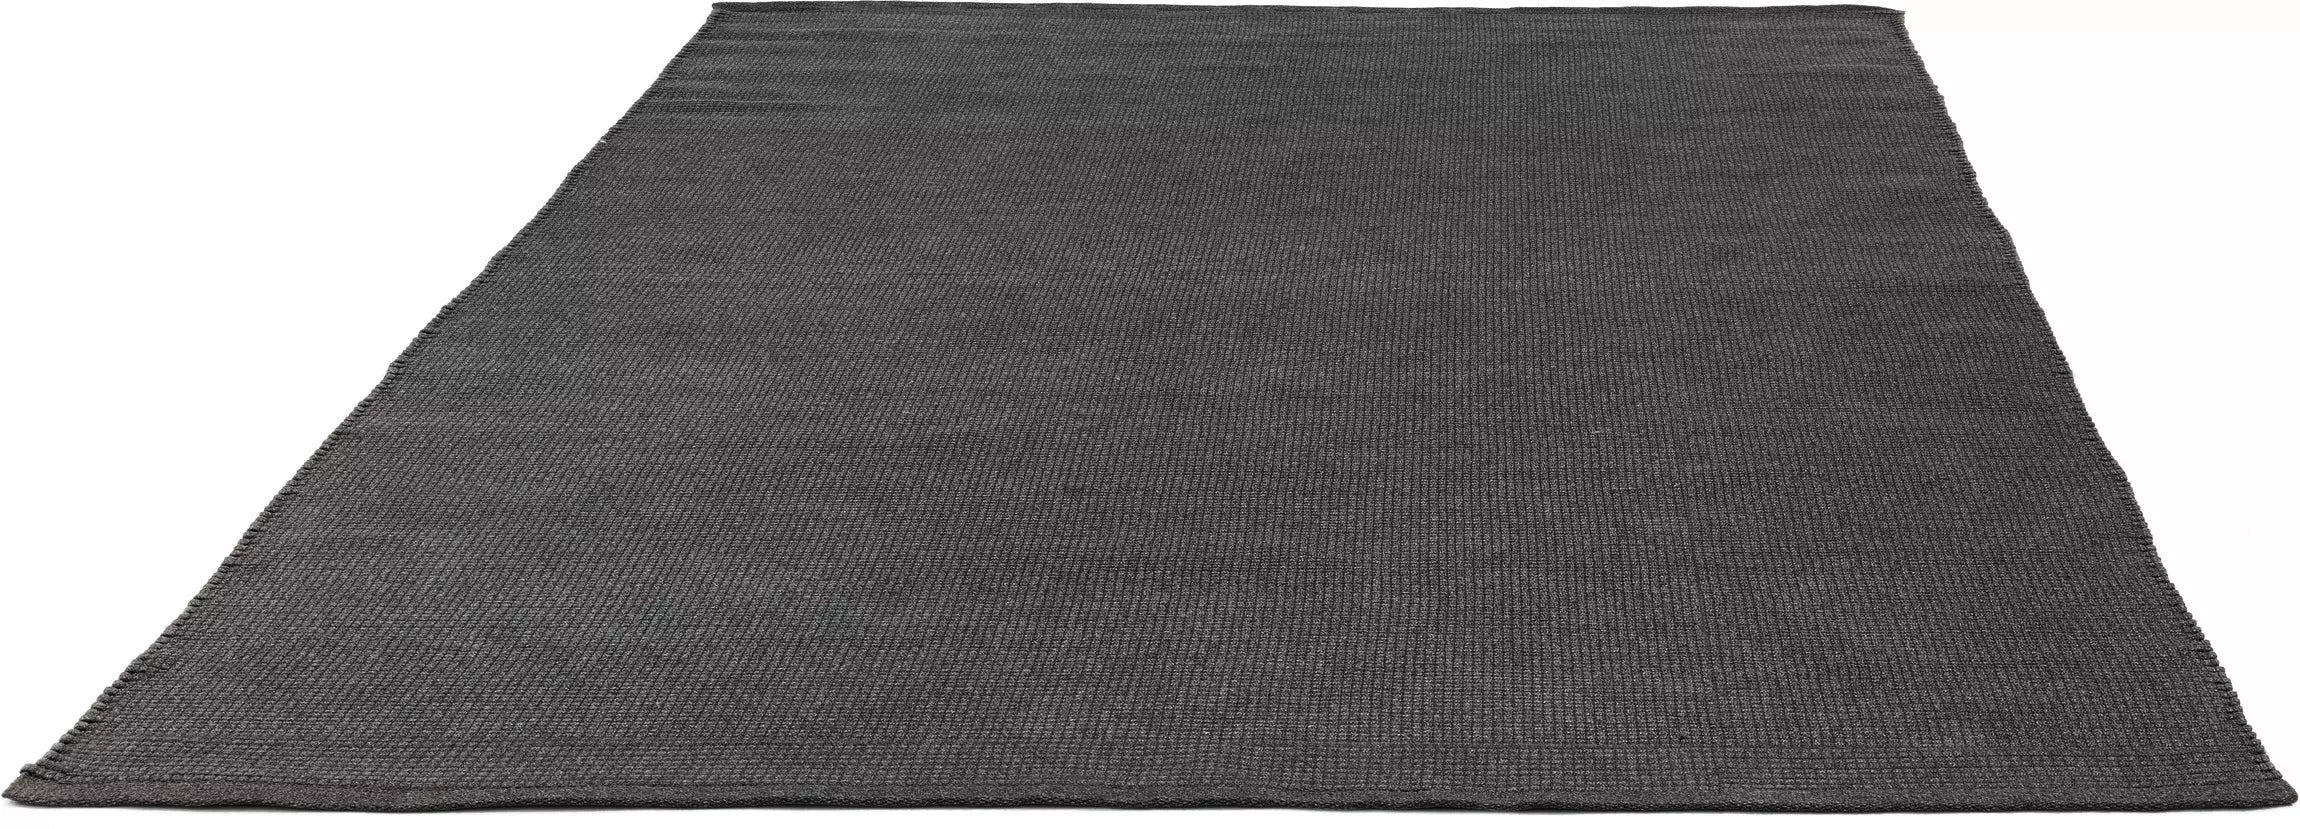 Manutti Linear Rugs 200x290 anthracite